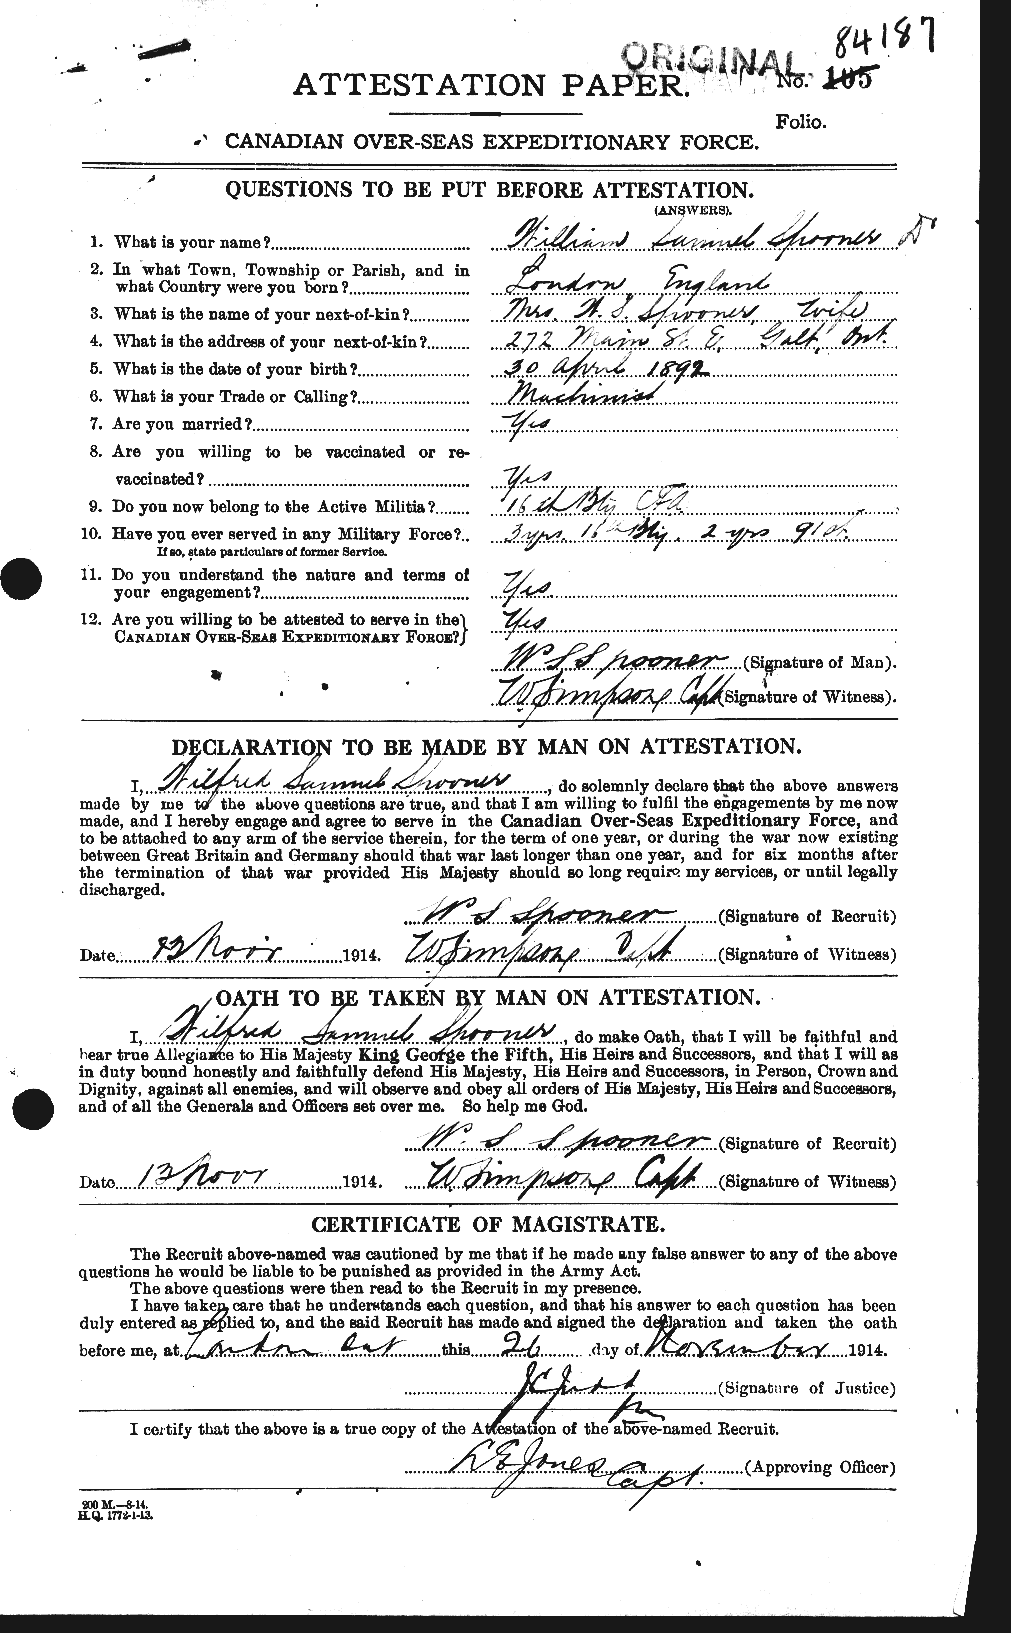 Personnel Records of the First World War - CEF 113229a